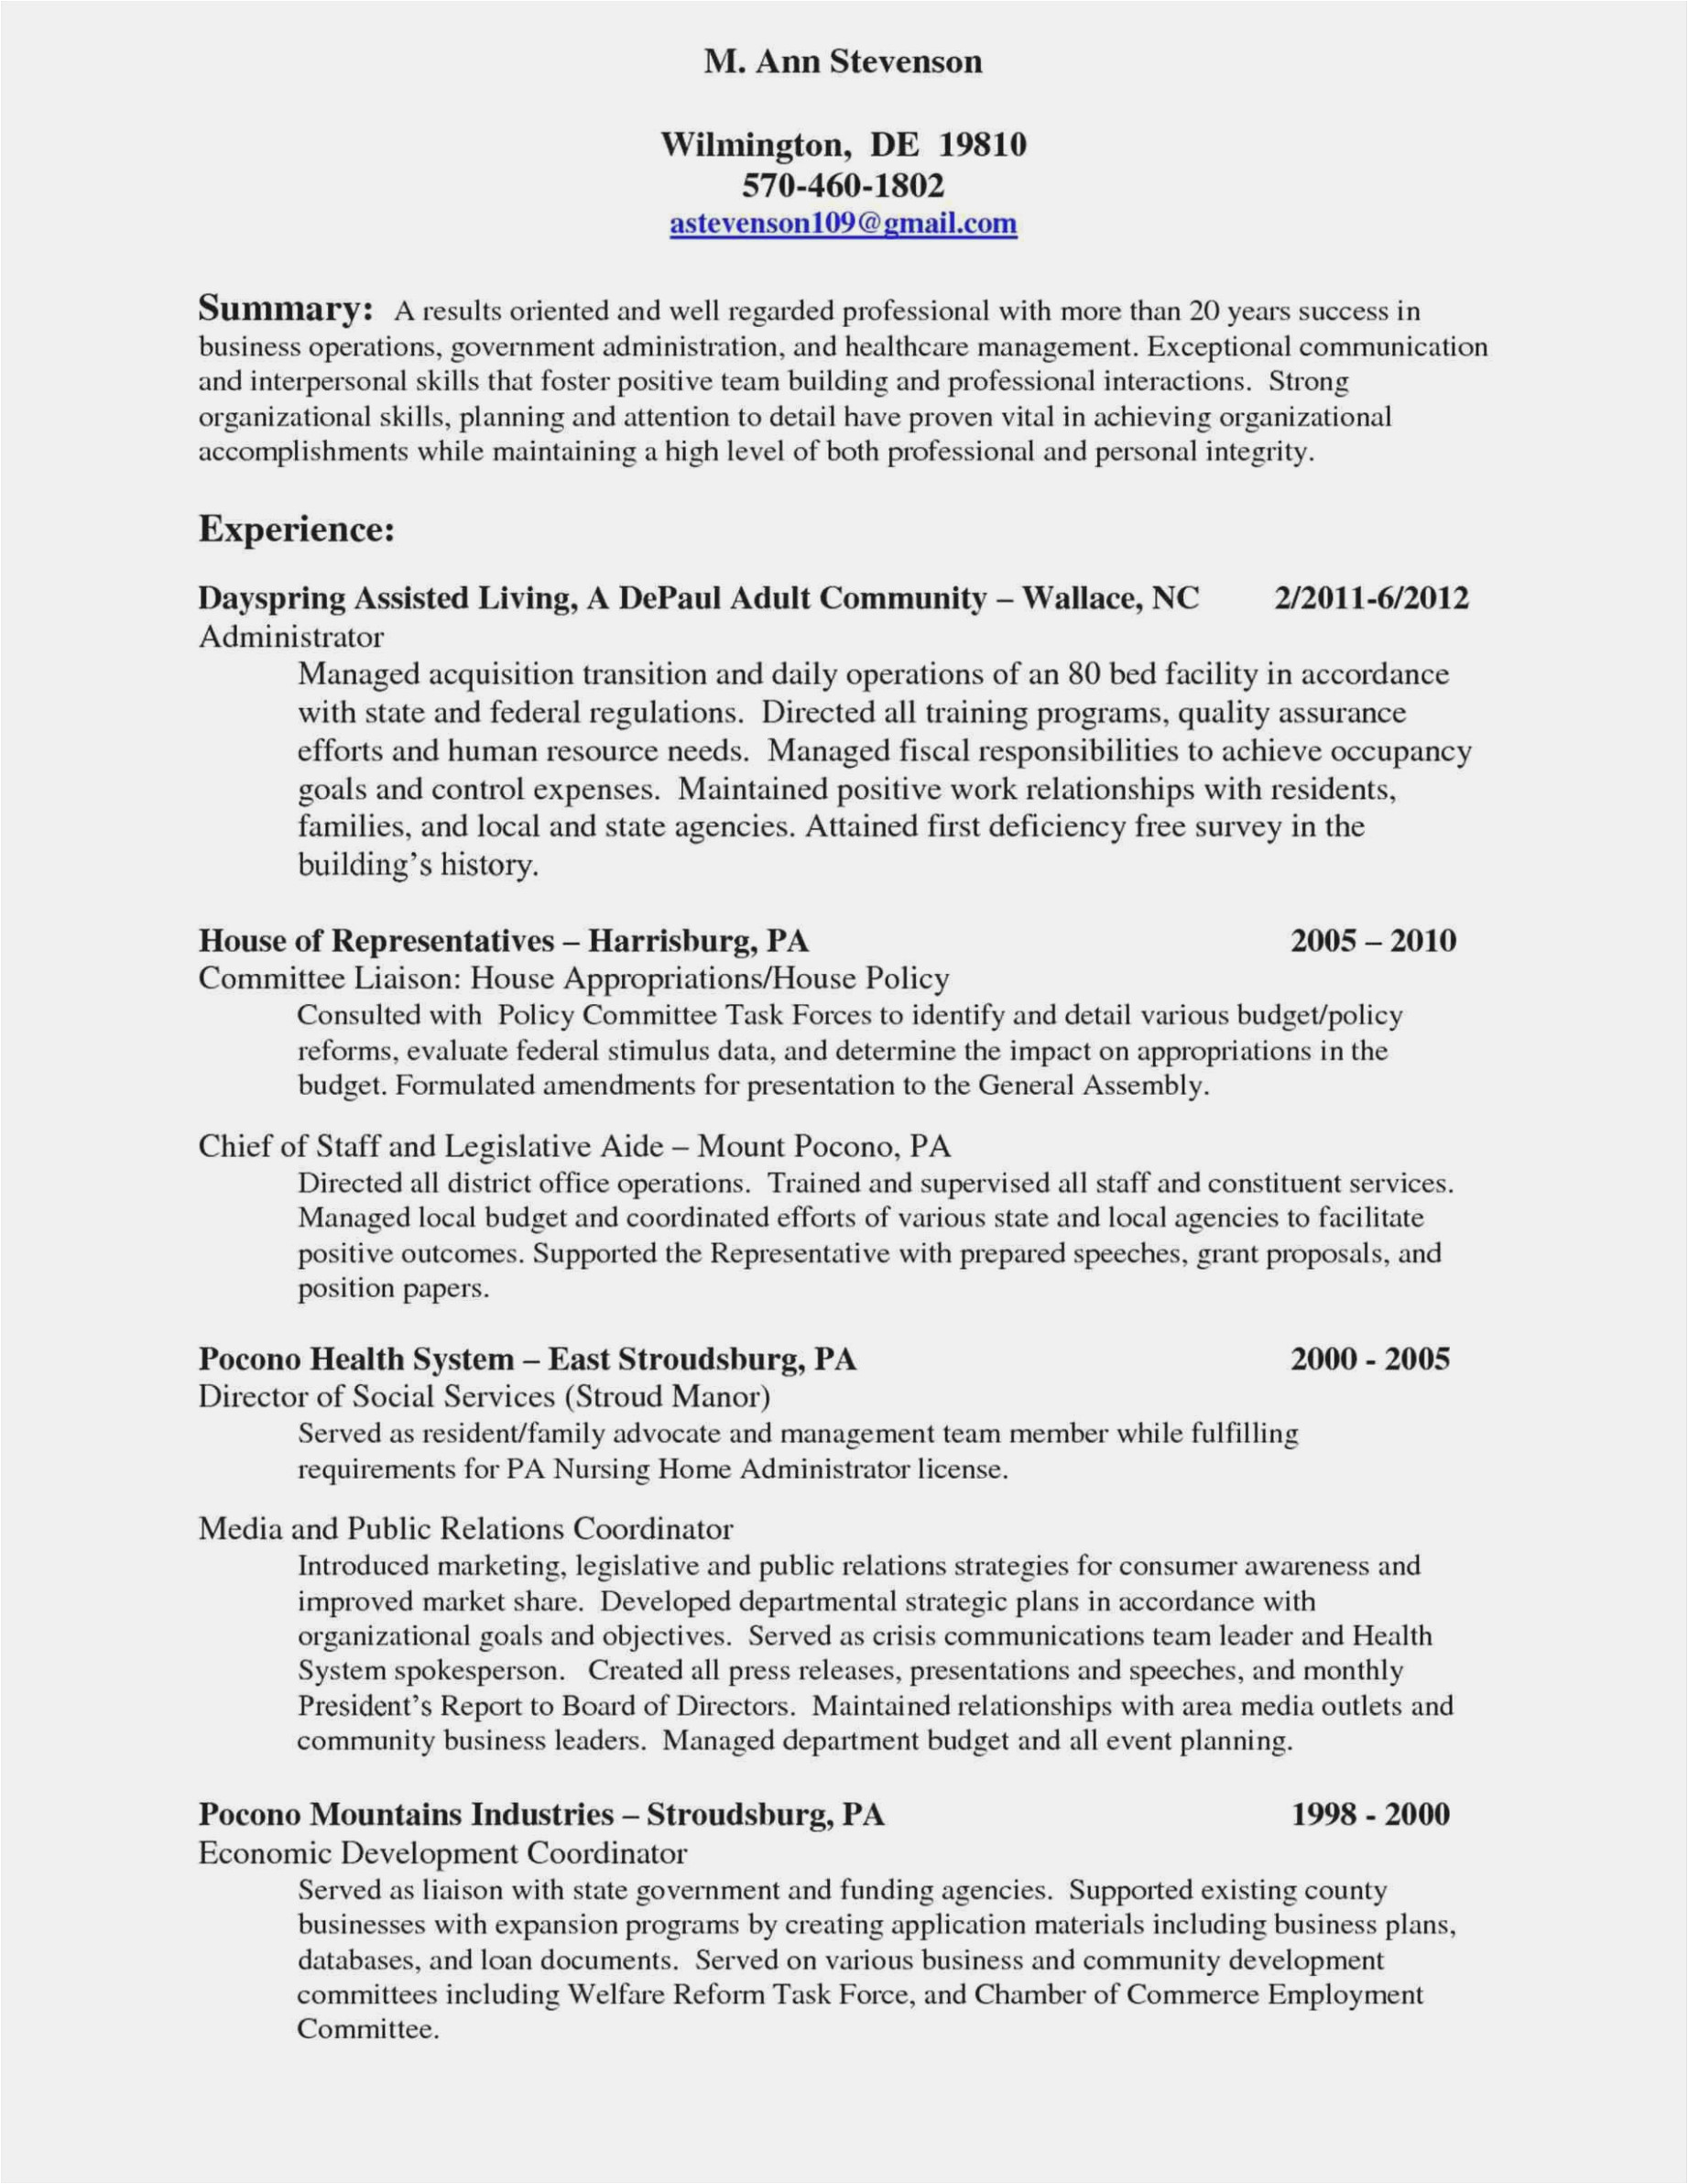 Non Profit Board Member Resume Sample Seven Things You Probably Didn’t Know About Executive